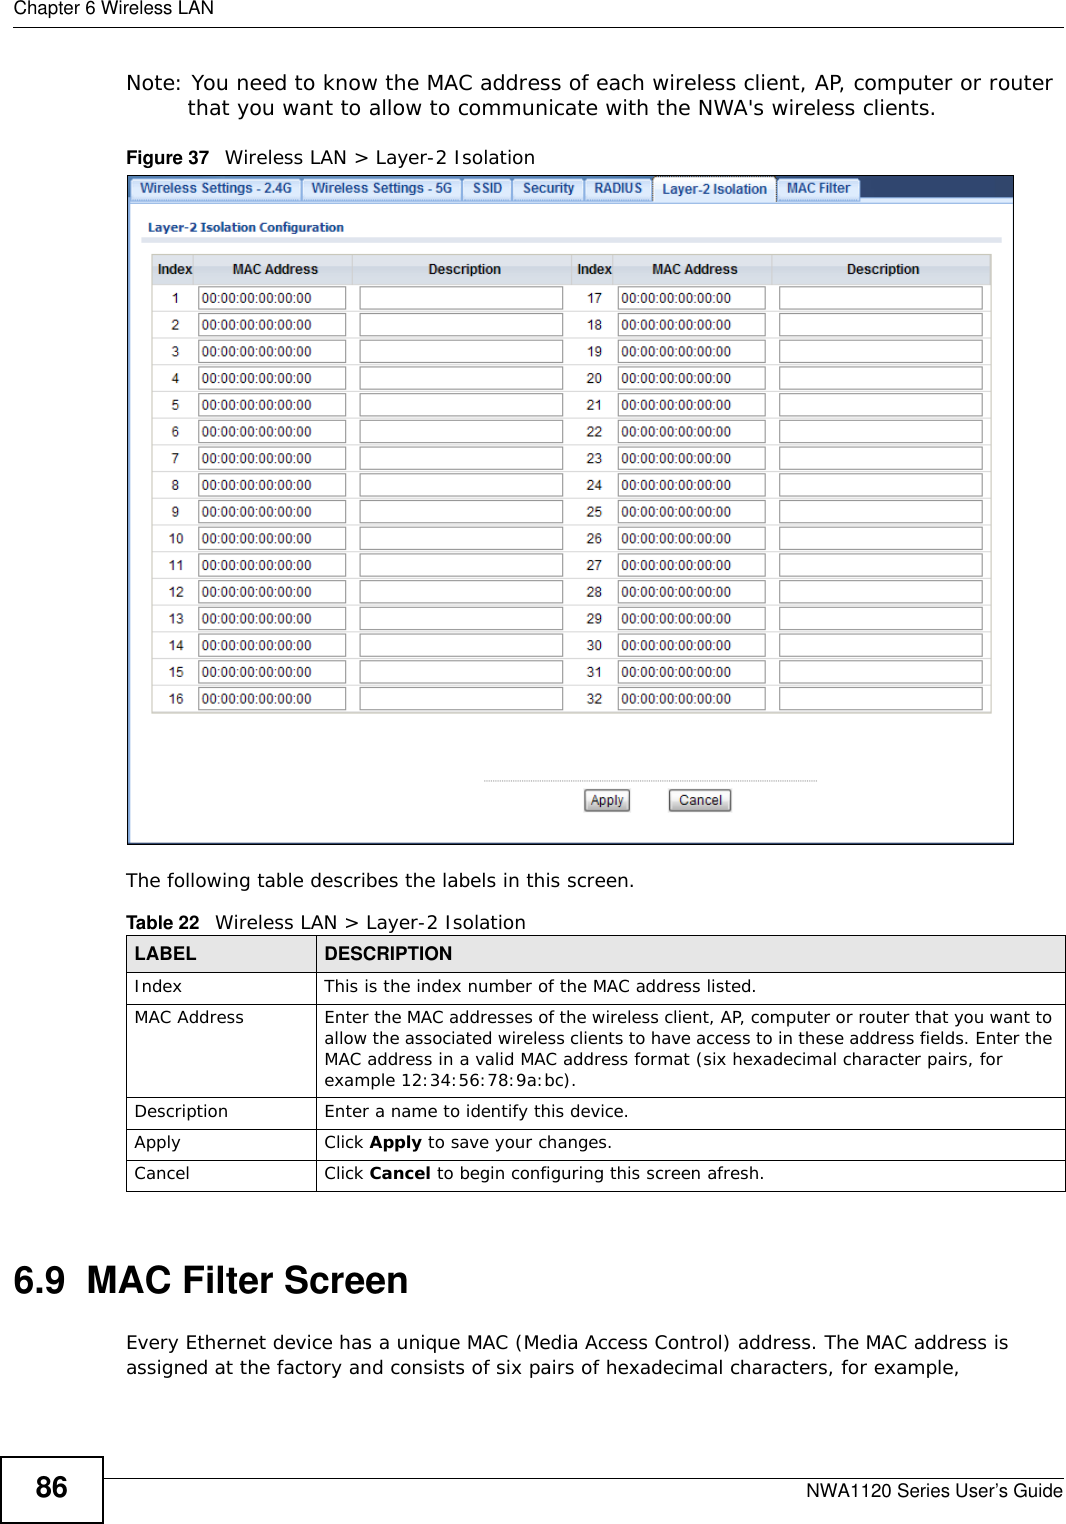 Chapter 6 Wireless LANNWA1120 Series User’s Guide86Note: You need to know the MAC address of each wireless client, AP, computer or router that you want to allow to communicate with the NWA&apos;s wireless clients.Figure 37   Wireless LAN &gt; Layer-2 Isolation The following table describes the labels in this screen.6.9  MAC Filter ScreenEvery Ethernet device has a unique MAC (Media Access Control) address. The MAC address is assigned at the factory and consists of six pairs of hexadecimal characters, for example, Table 22   Wireless LAN &gt; Layer-2 IsolationLABEL DESCRIPTIONIndex This is the index number of the MAC address listed.MAC Address Enter the MAC addresses of the wireless client, AP, computer or router that you want to allow the associated wireless clients to have access to in these address fields. Enter the MAC address in a valid MAC address format (six hexadecimal character pairs, for example 12:34:56:78:9a:bc).Description Enter a name to identify this device.Apply Click Apply to save your changes.Cancel Click Cancel to begin configuring this screen afresh.